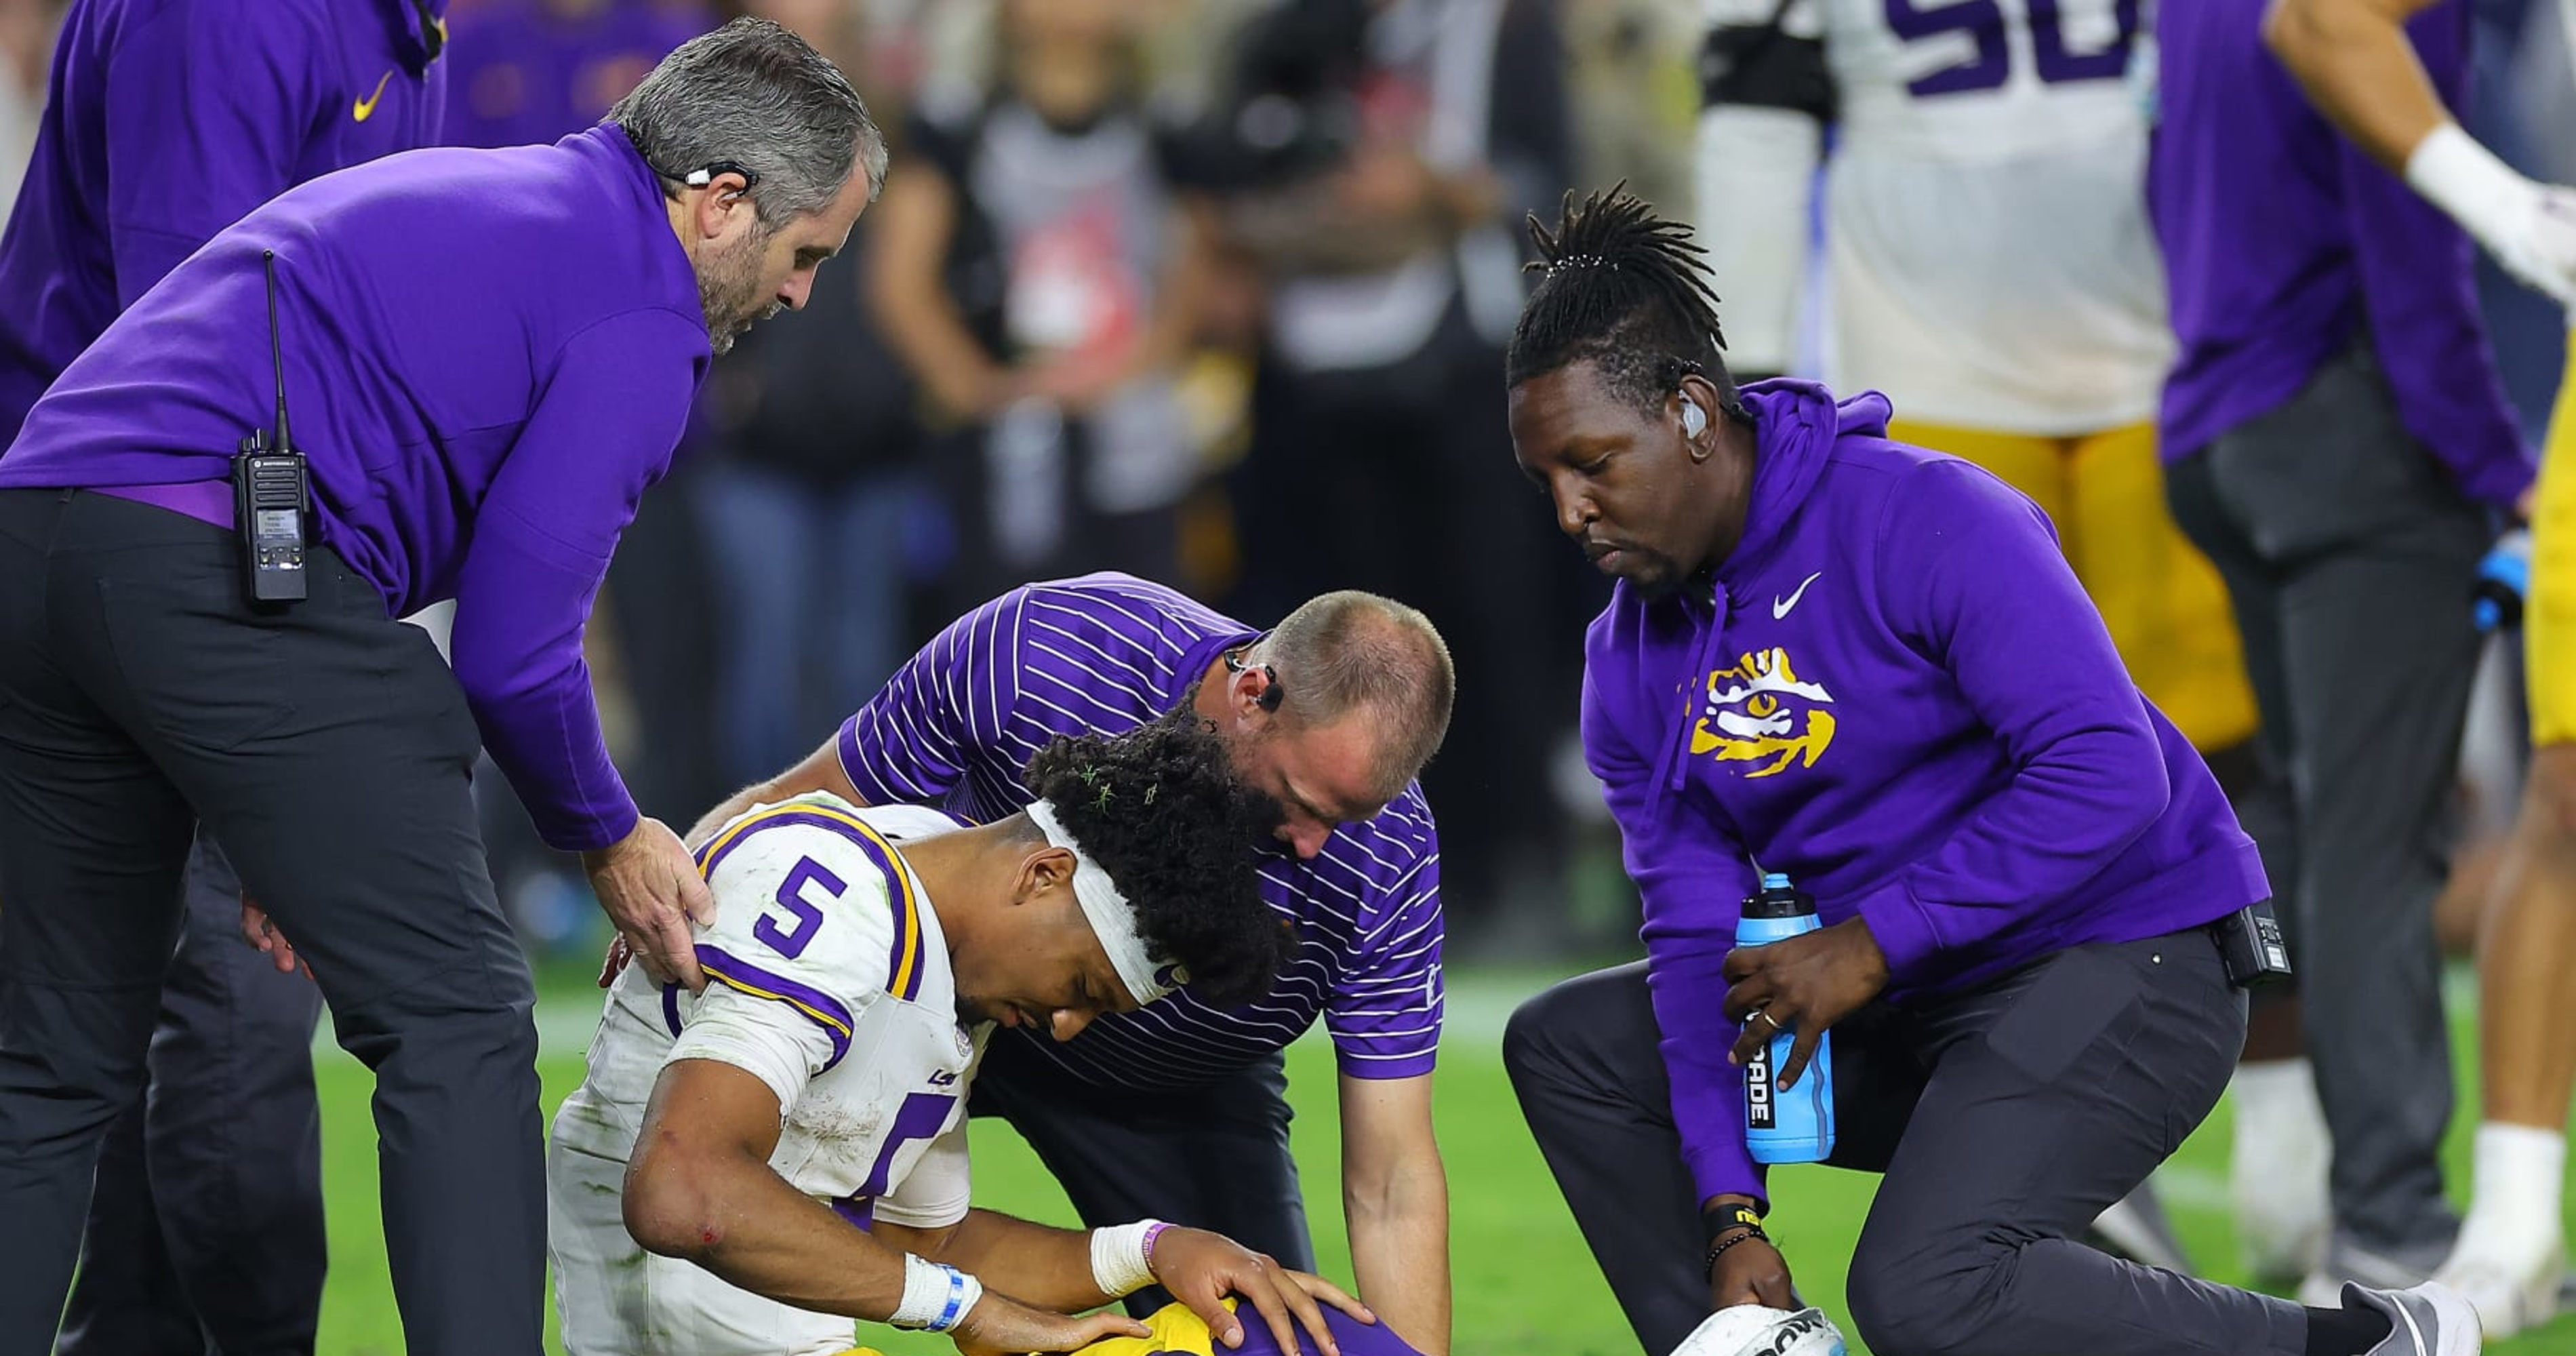 LSU's Jayden Daniels Expected to Play vs. Florida After Concussion, Brian Kelly Says